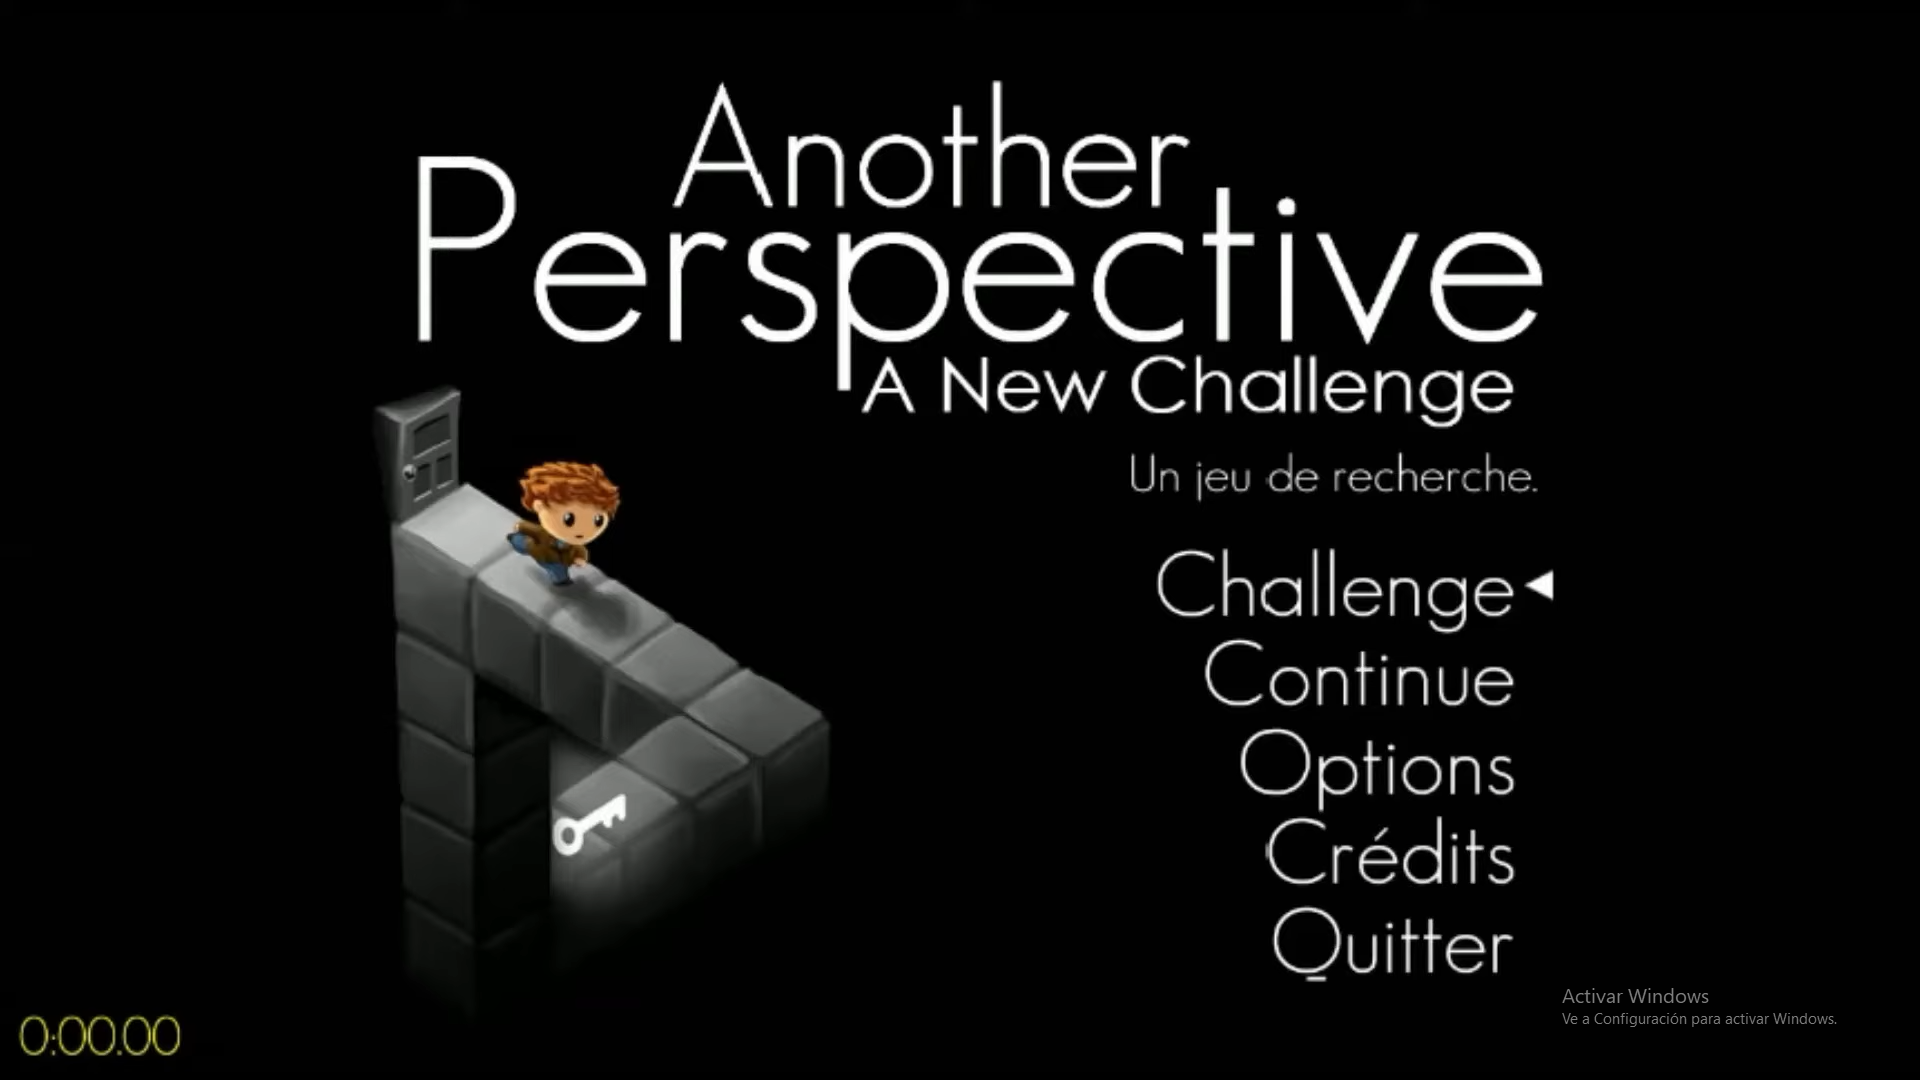 Another Perspective: A New Challenge